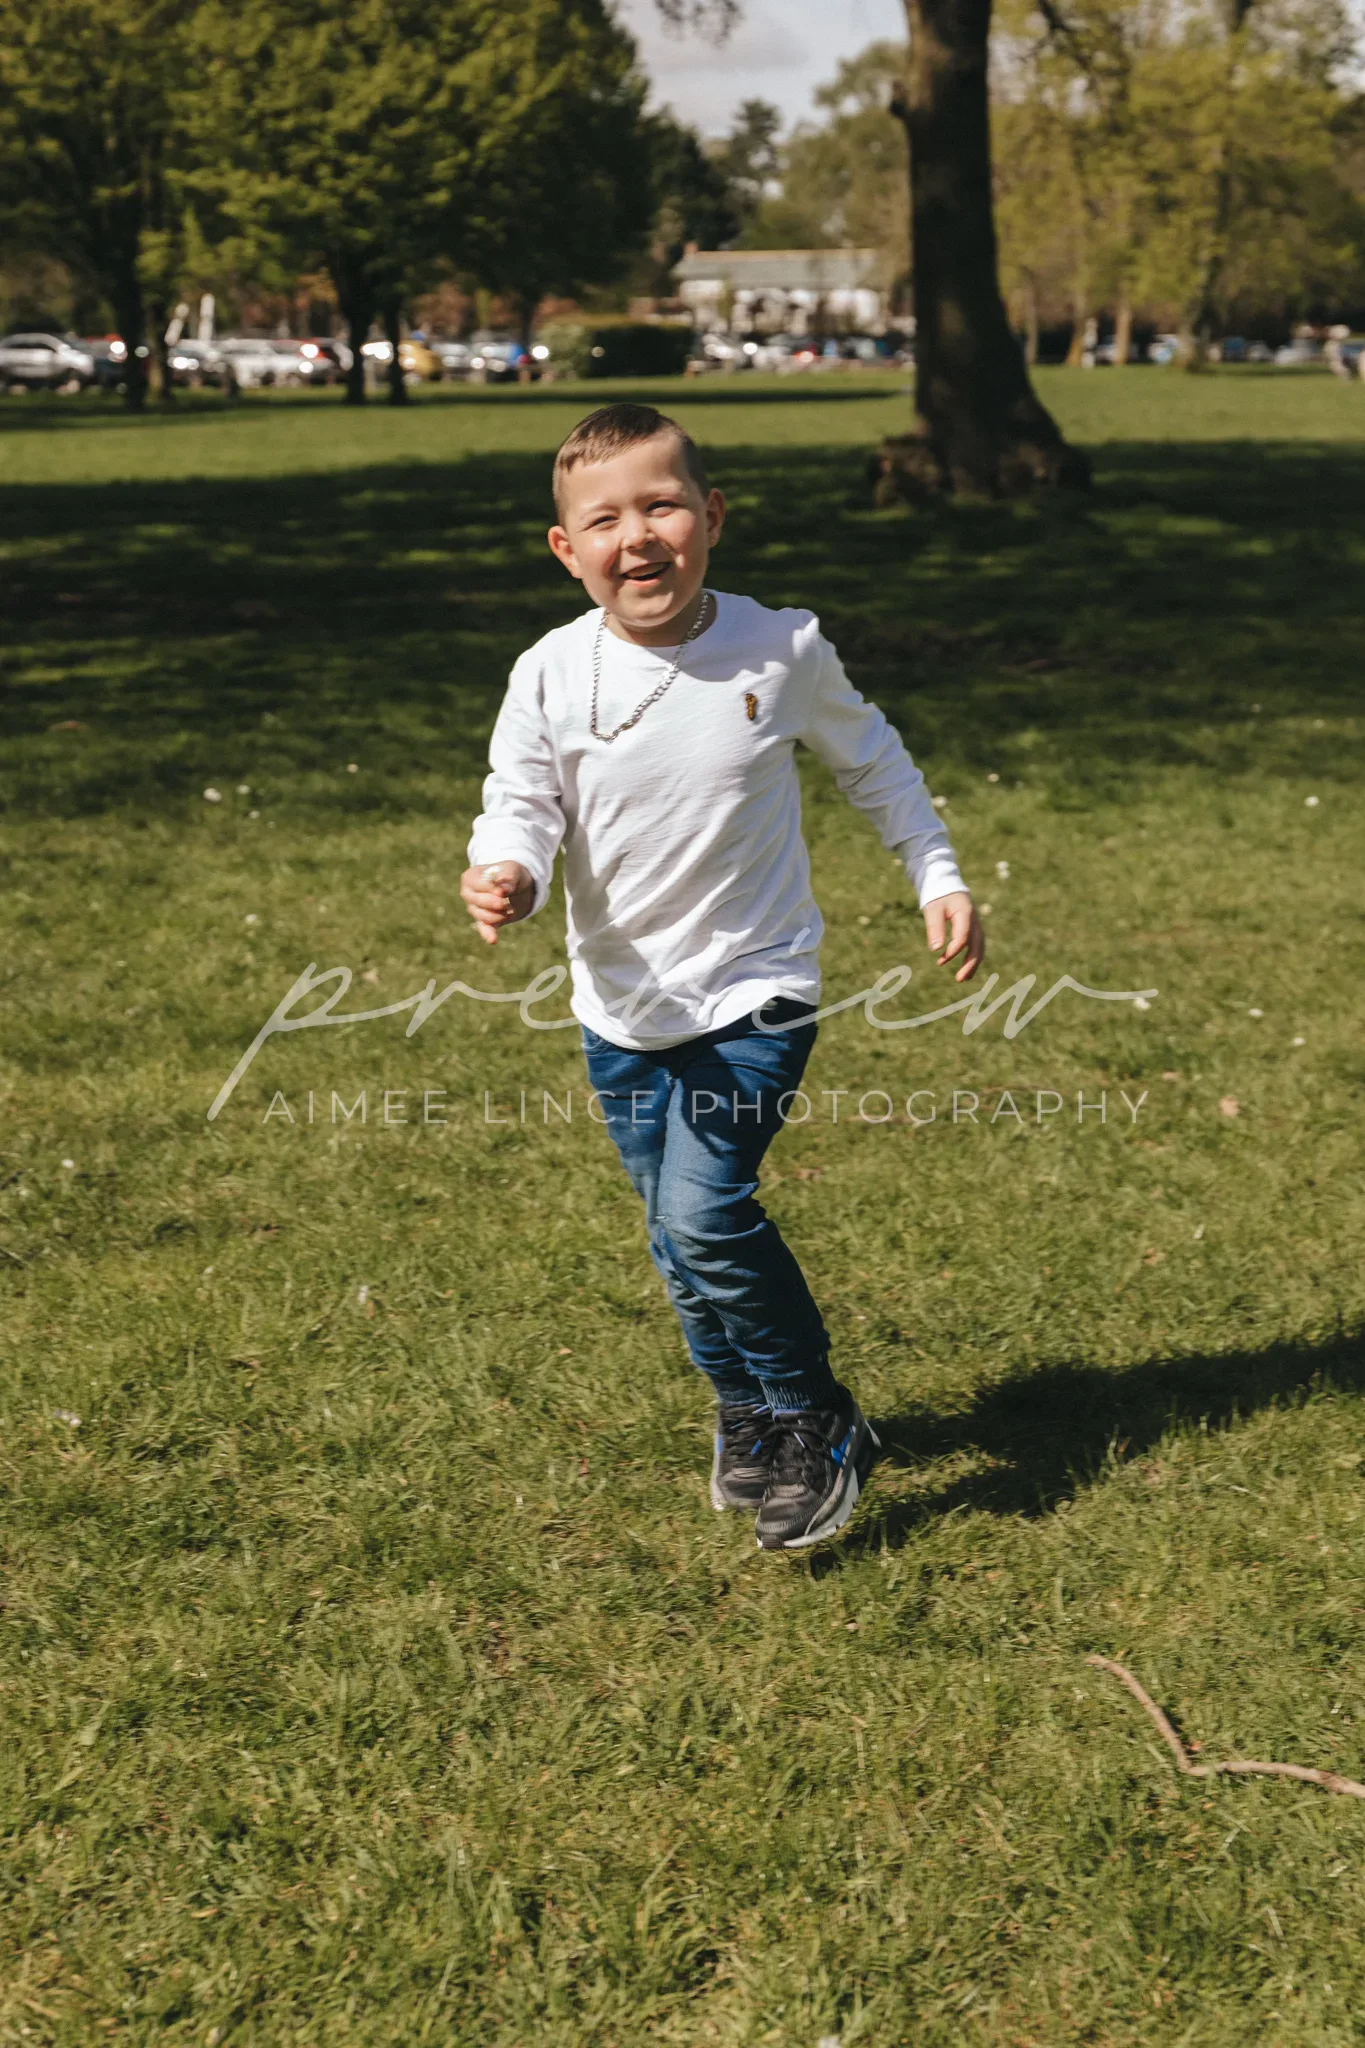 A young boy joyfully running towards the camera in a sunny park. he's wearing a white long-sleeve shirt, jeans, and sneakers, with a blurred background of green grass and trees. the image bears a watermark "aimee linen photography.